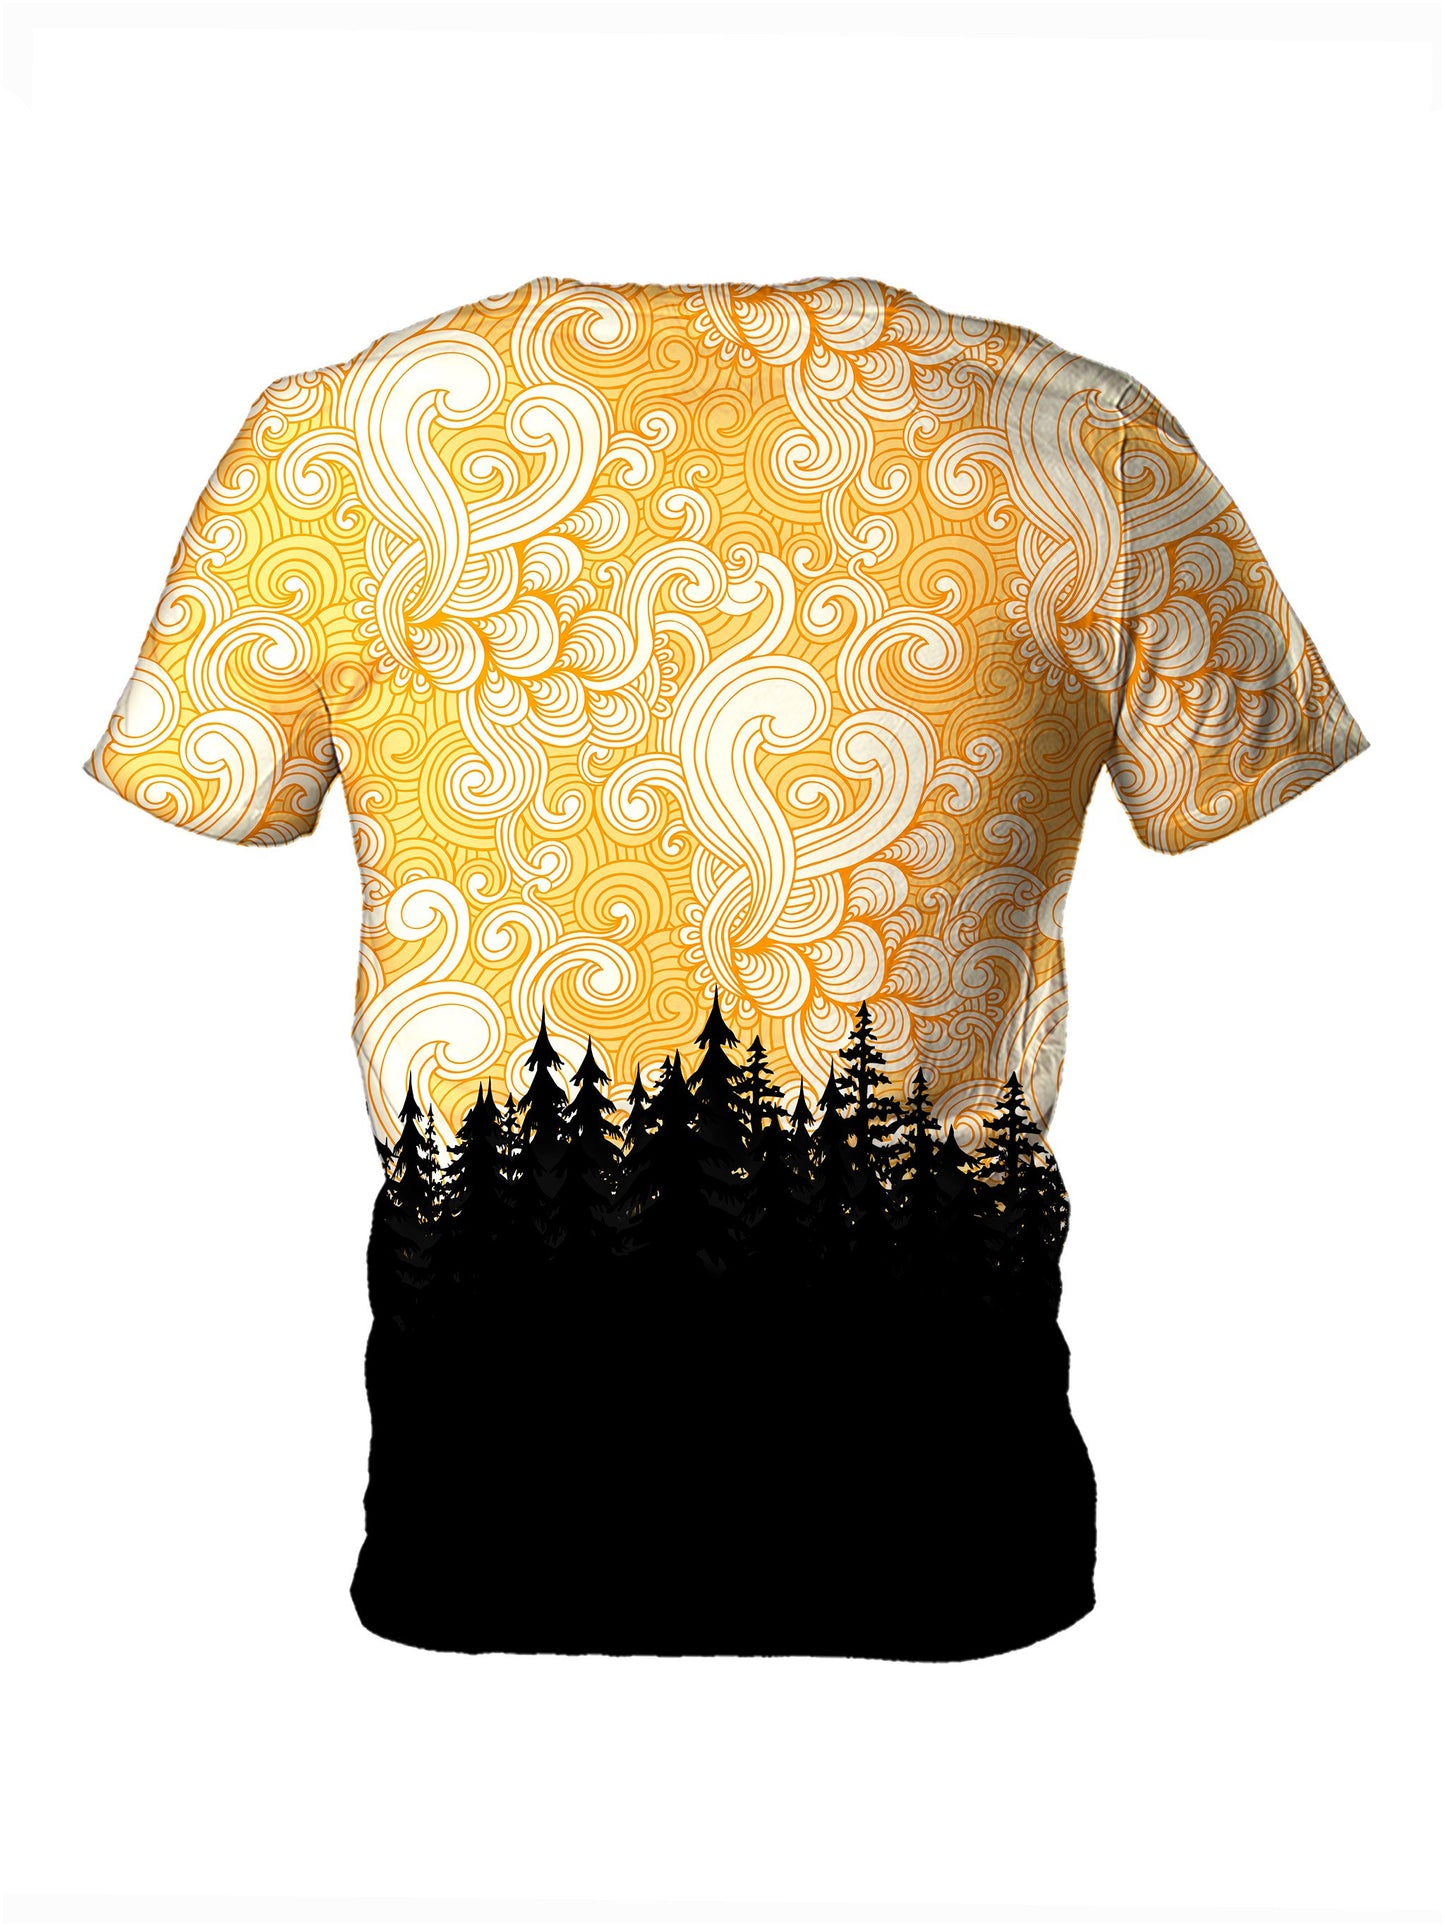 Back view of all over print psychedelic nature t shirt by Gratefully Dyed Apparel. 